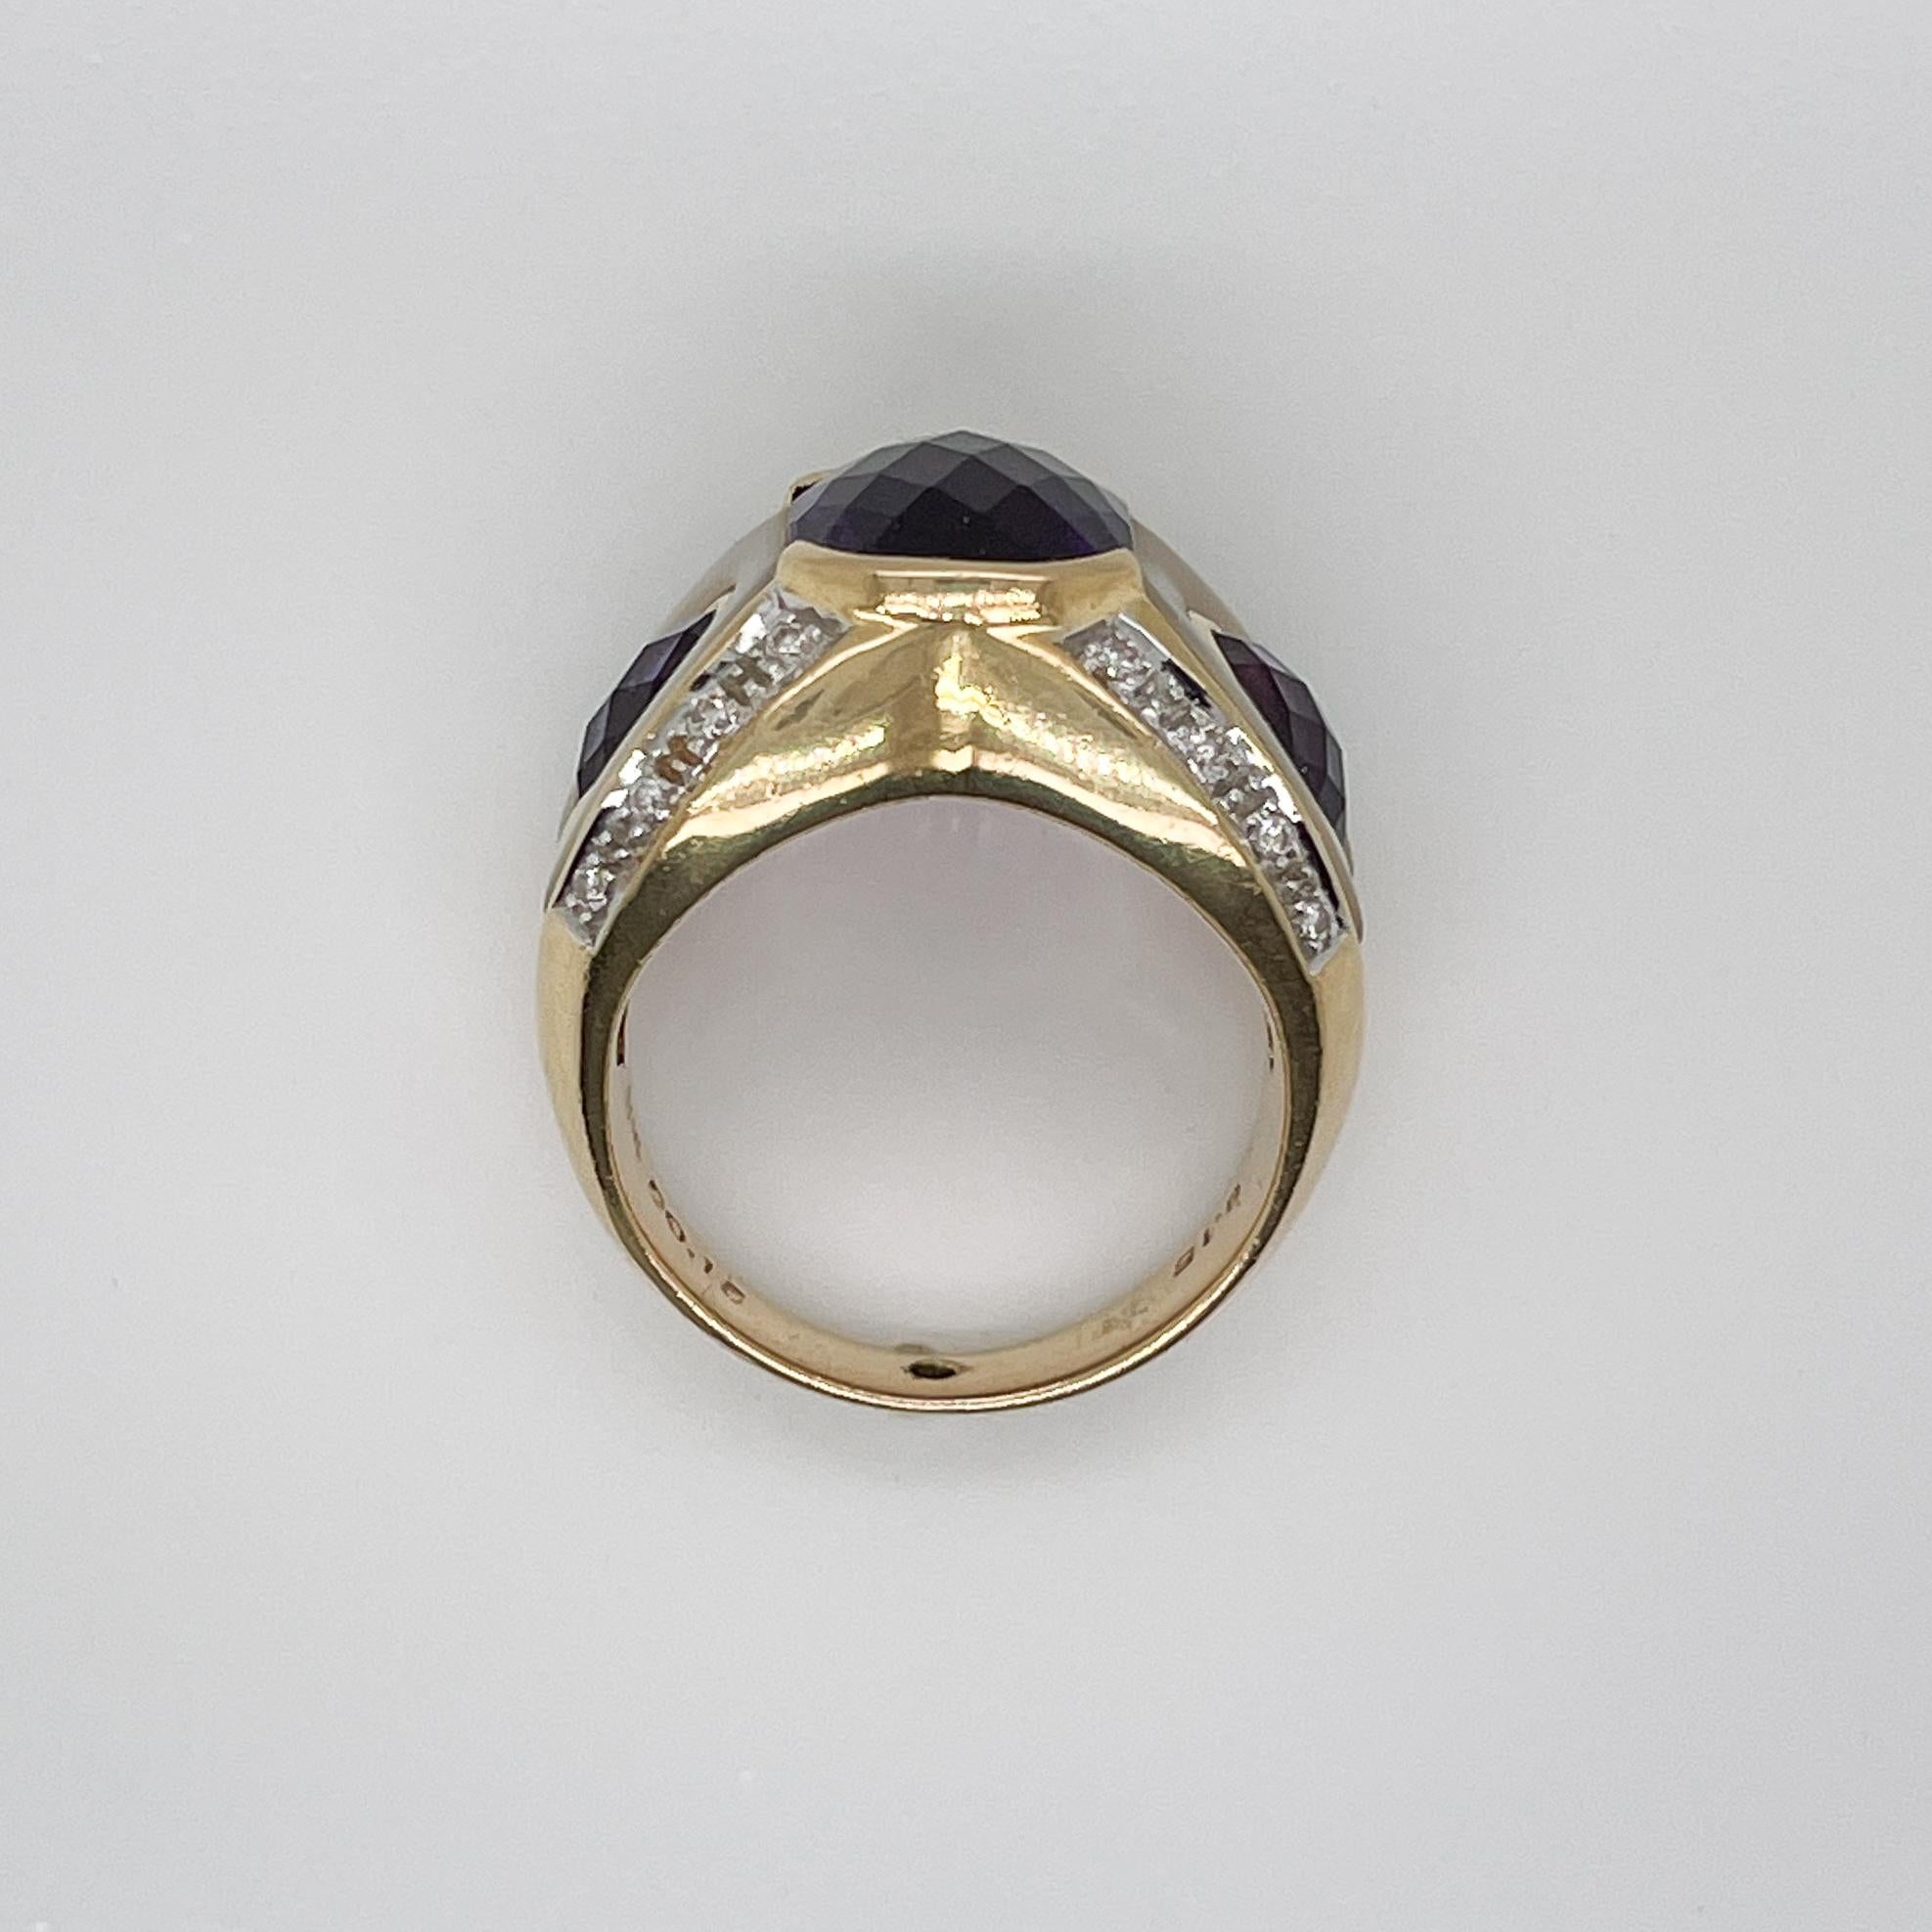 Owl/Parrot Bird Cocktail Ring in 18k Gold, Mother of Pearl, Diamond & Amethyst For Sale 8